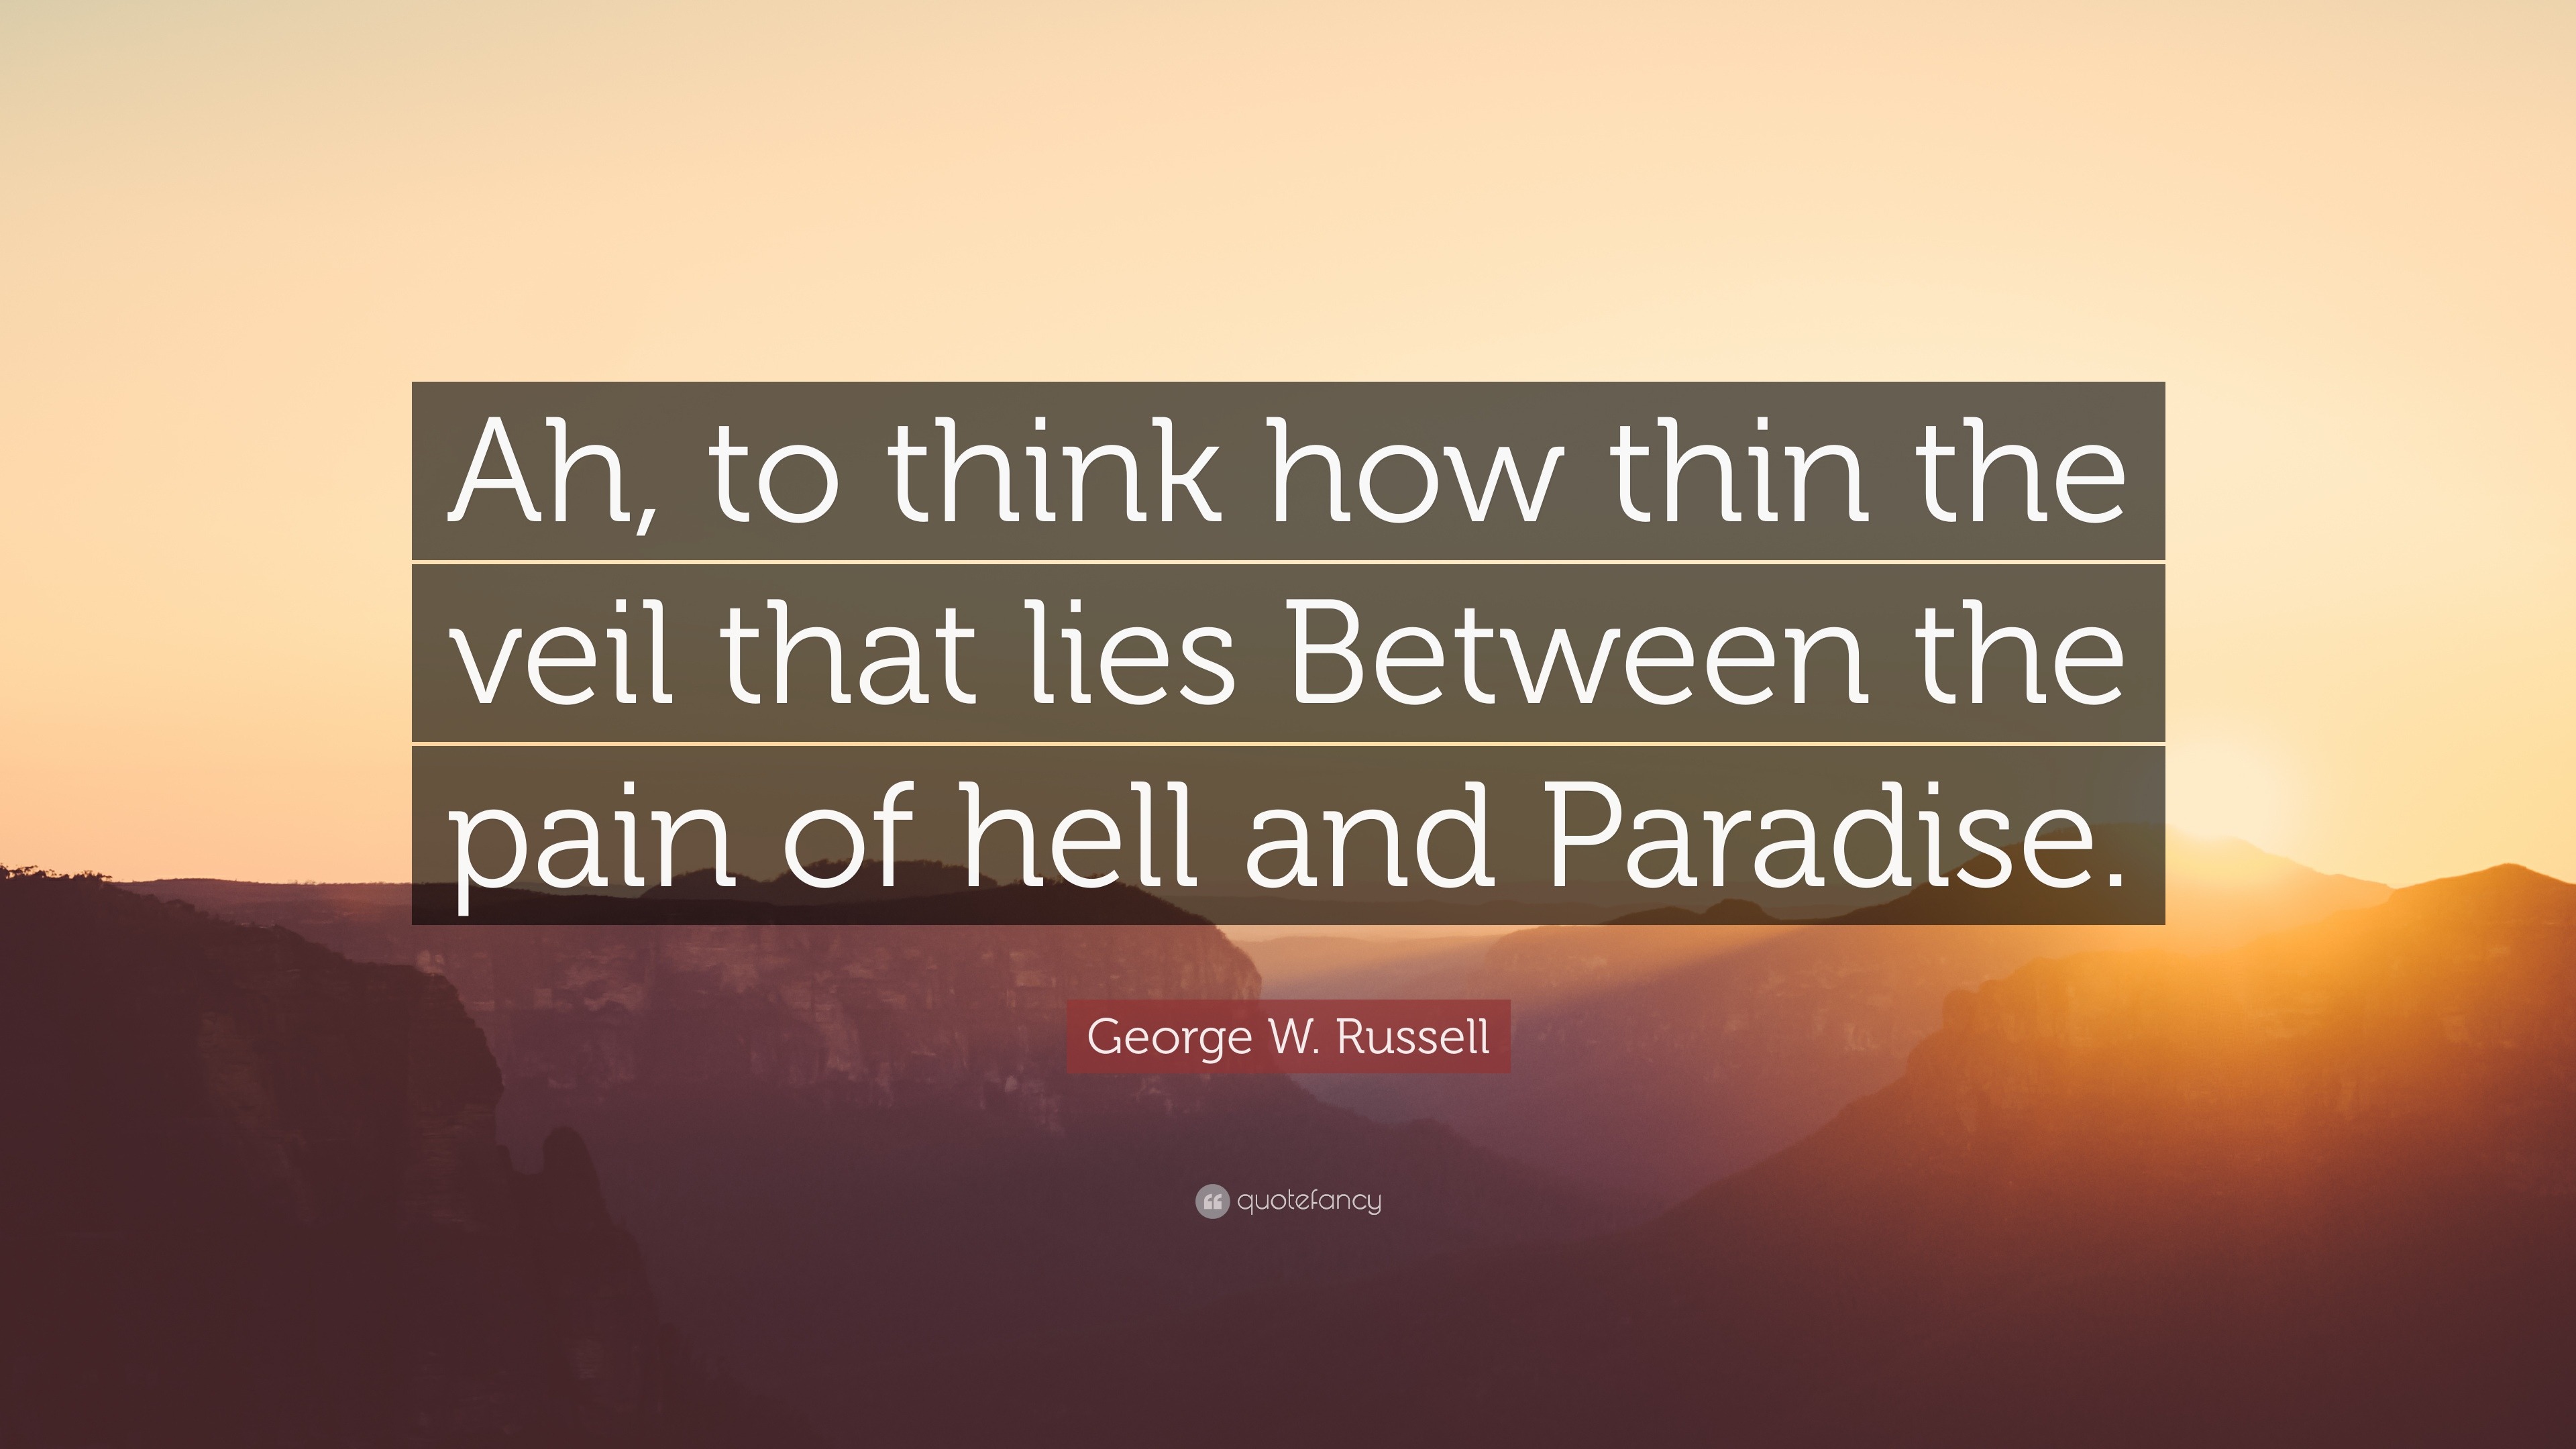 x  Quotes on X: “The path to paradise begins in hell.” - Dante